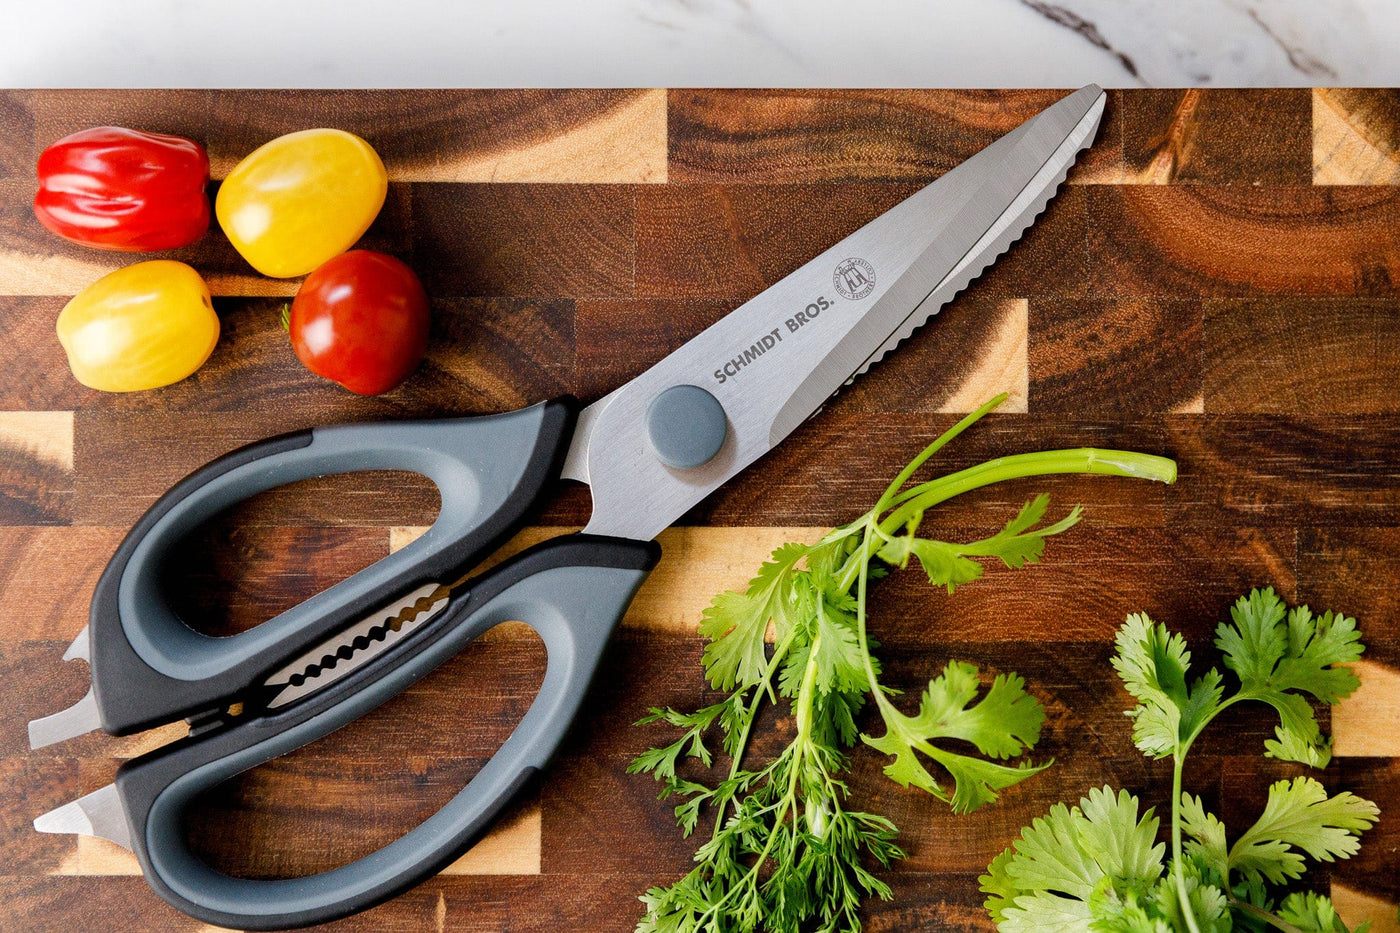 Everything You Need For Less kitchen shesrs